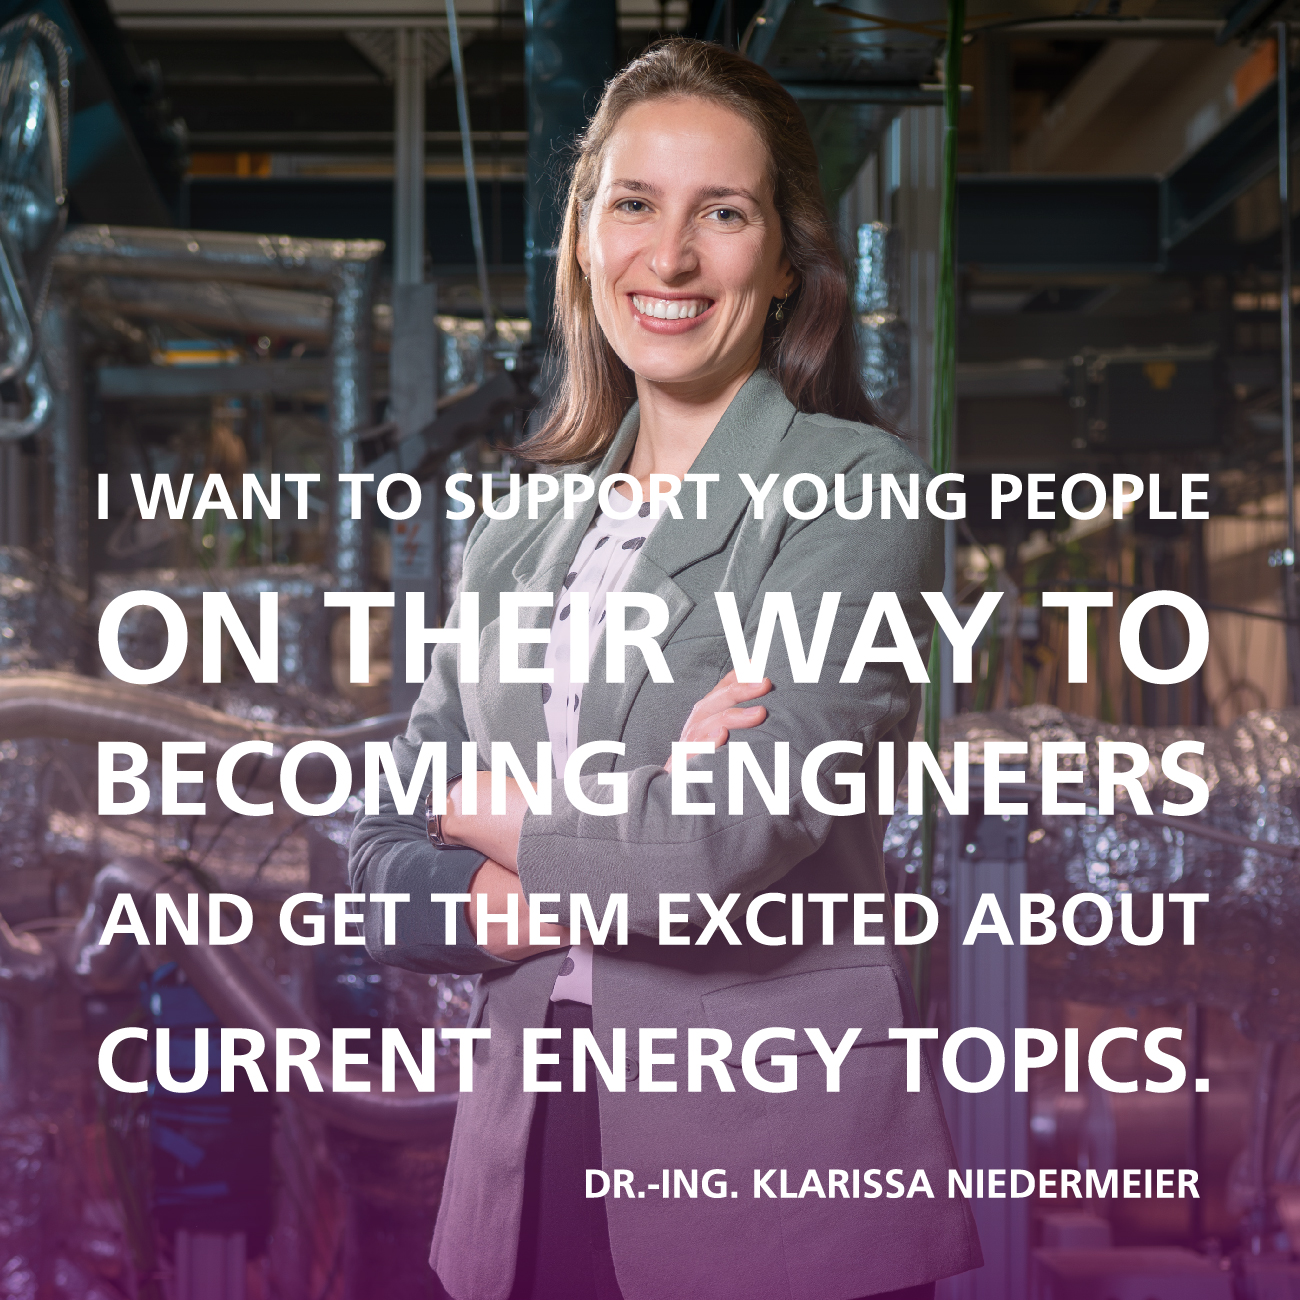 I want to support young people on their way to becoming engineers and get them excited about current energy topics. Quote by Dr.-Ing. Klarissa Niedermeier, Division 3, KIT 